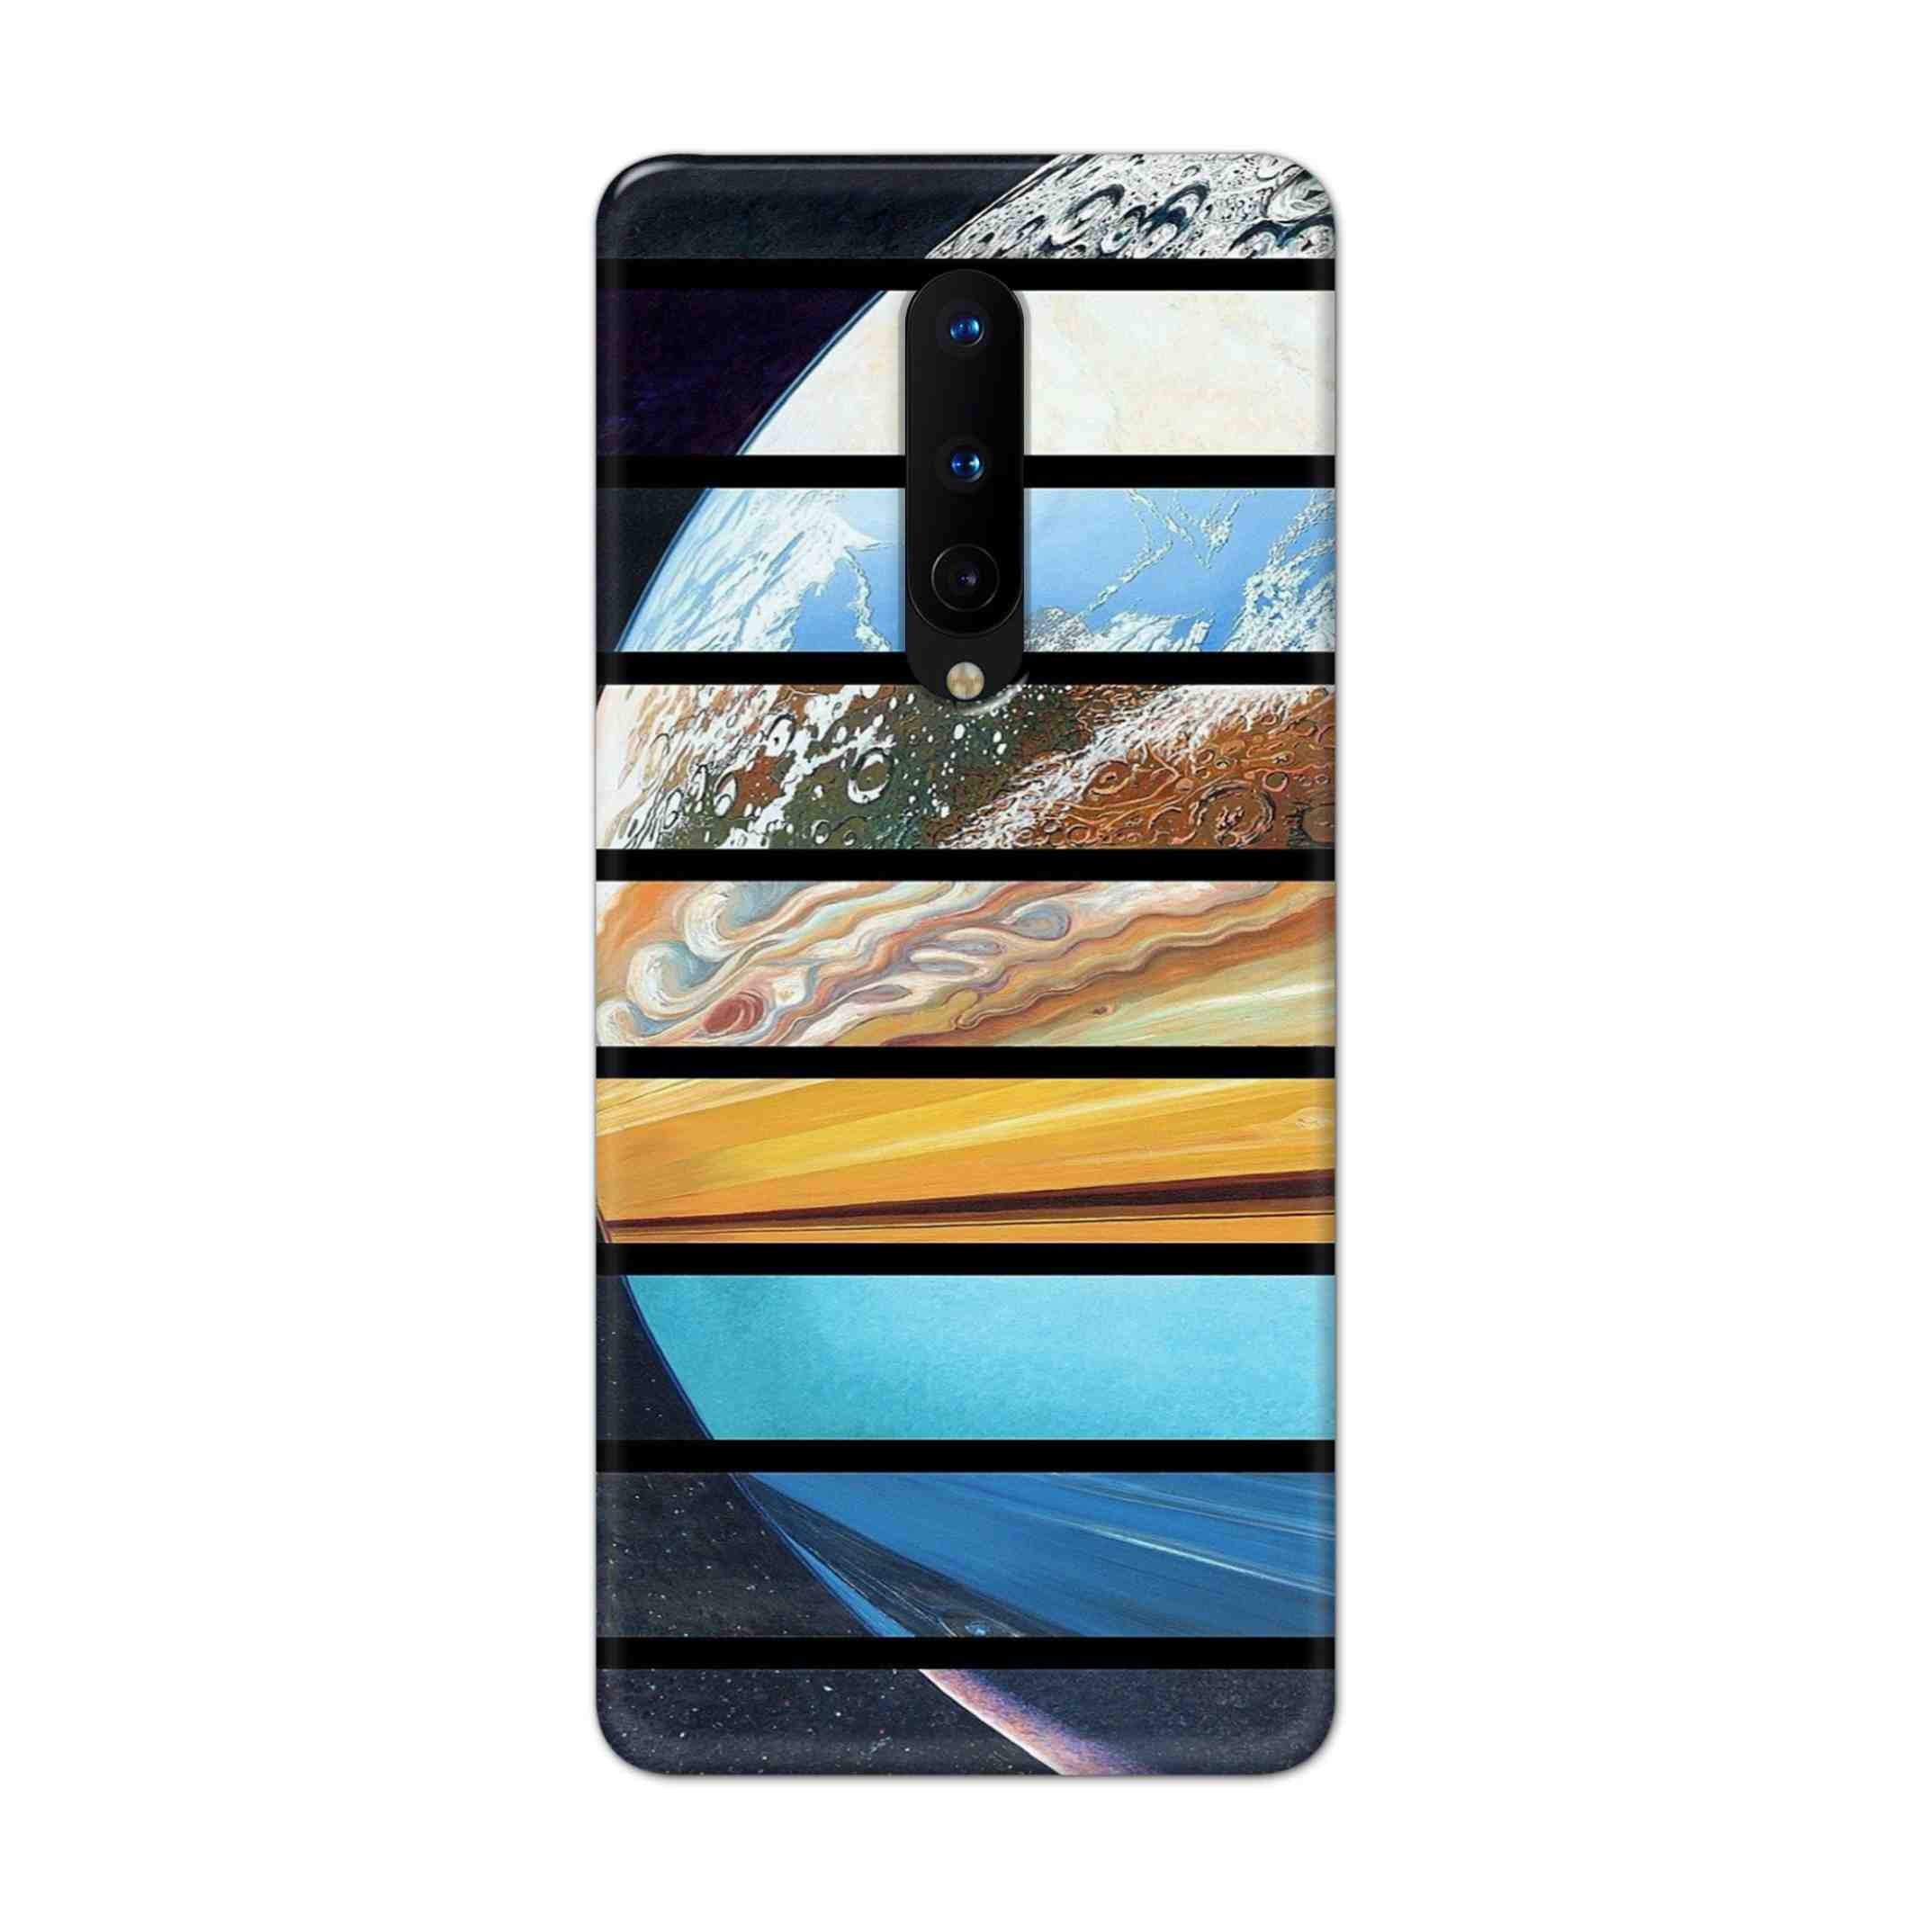 Buy Colourful Earth Hard Back Mobile Phone Case Cover For OnePlus 8 Online